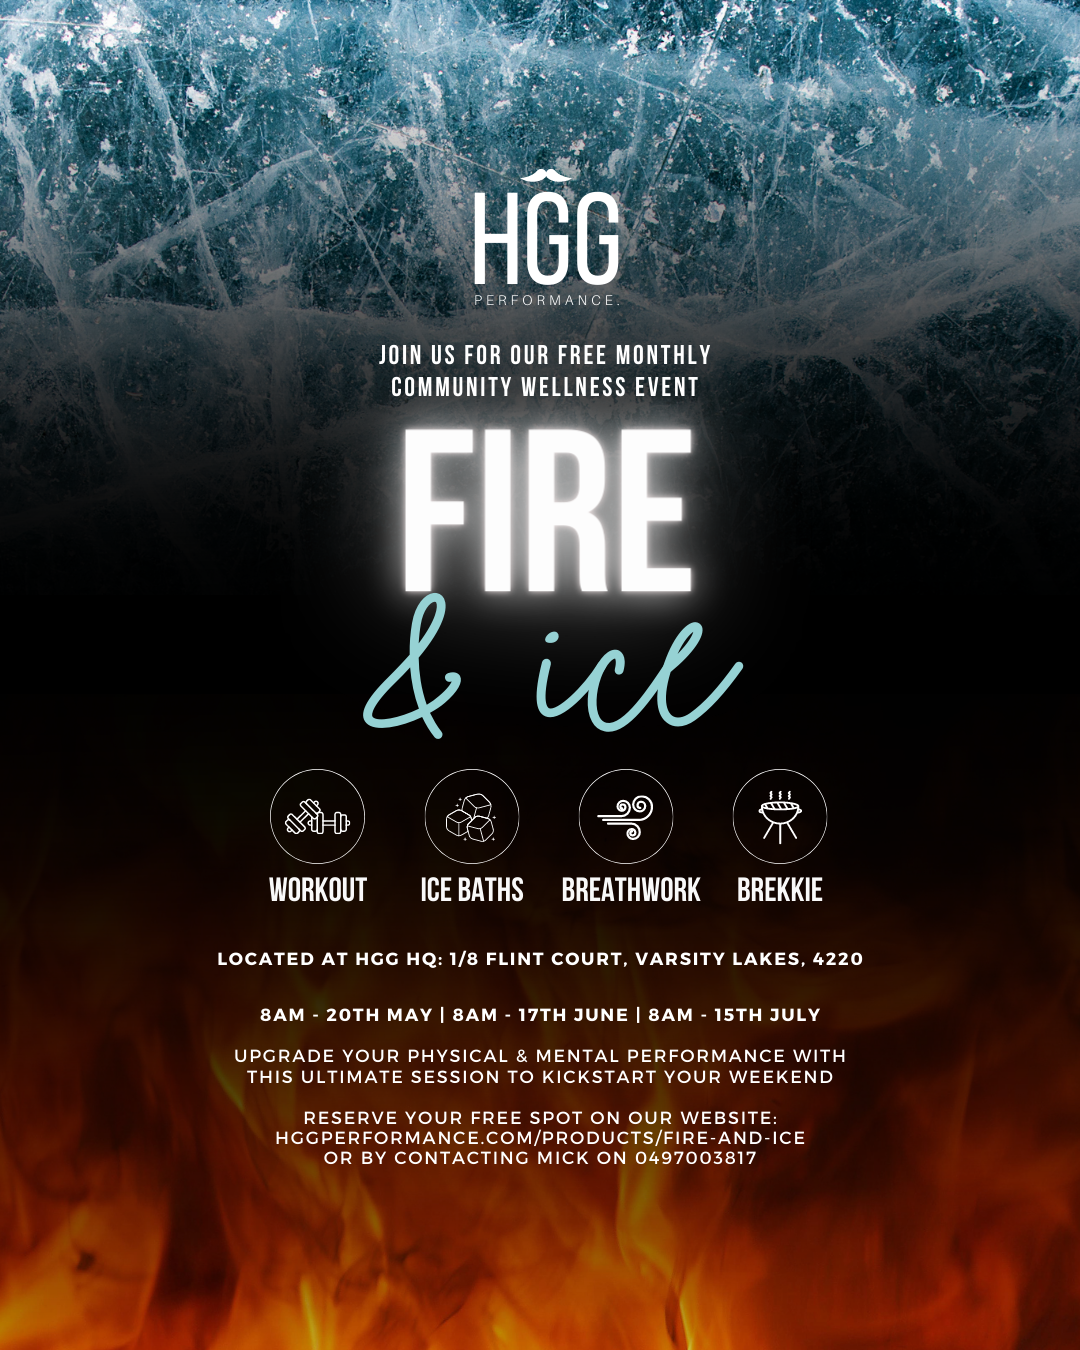 FREE EVENT: Fire & Ice Event